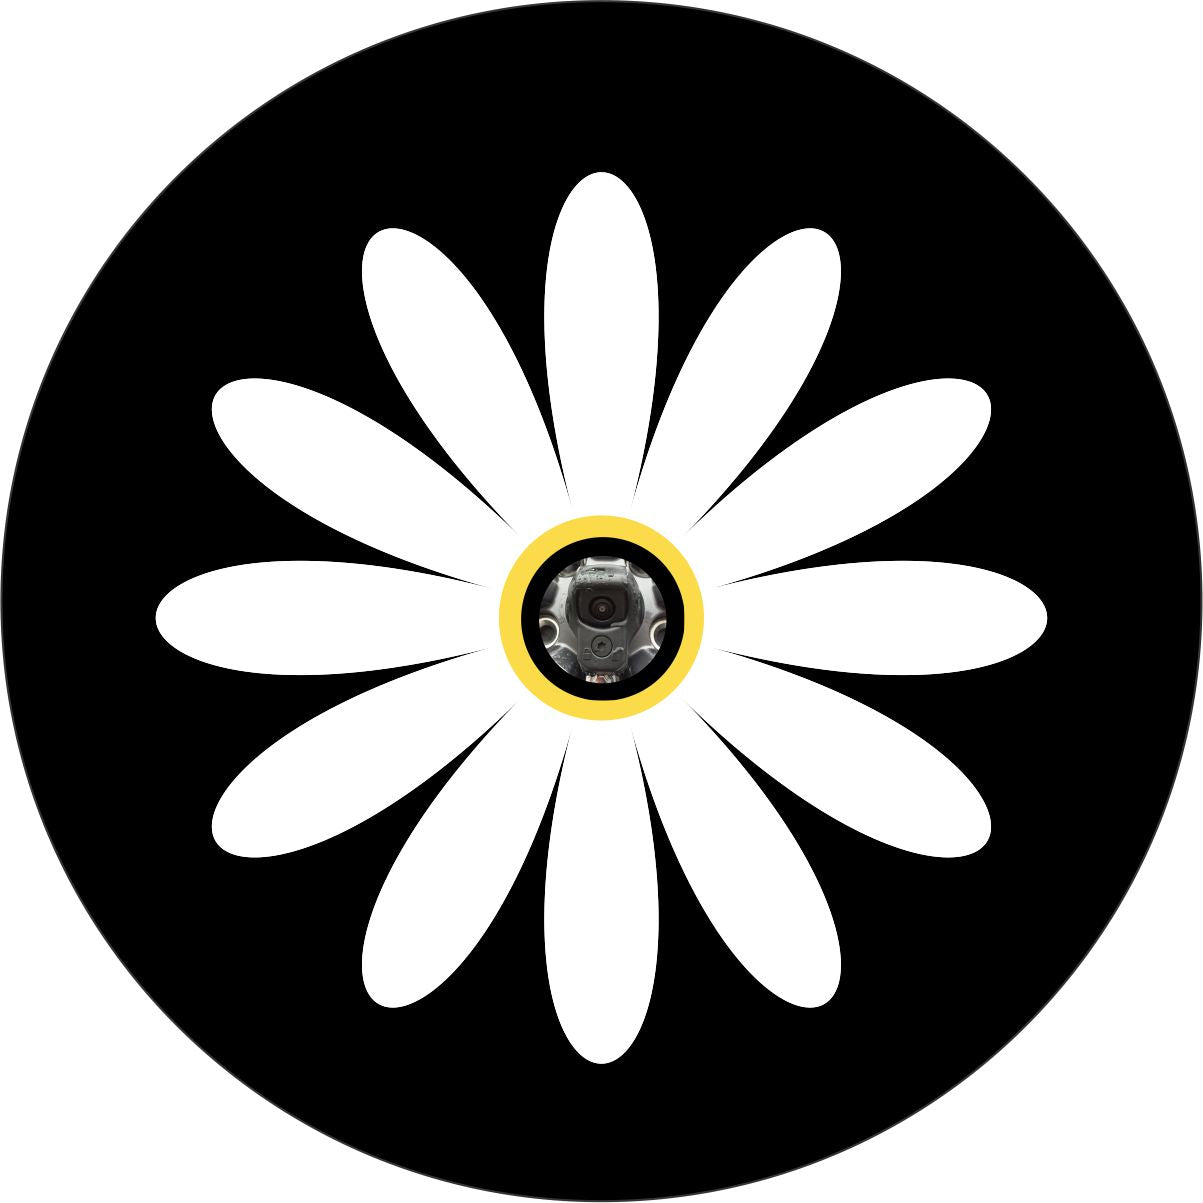 Black vinyl spare tire cover with a white daisy and yellow center. Simple spare tire cover design of a plain two color daisy and a center hole space to accommodate a backup camera built into the center of the spare wheel hang. 